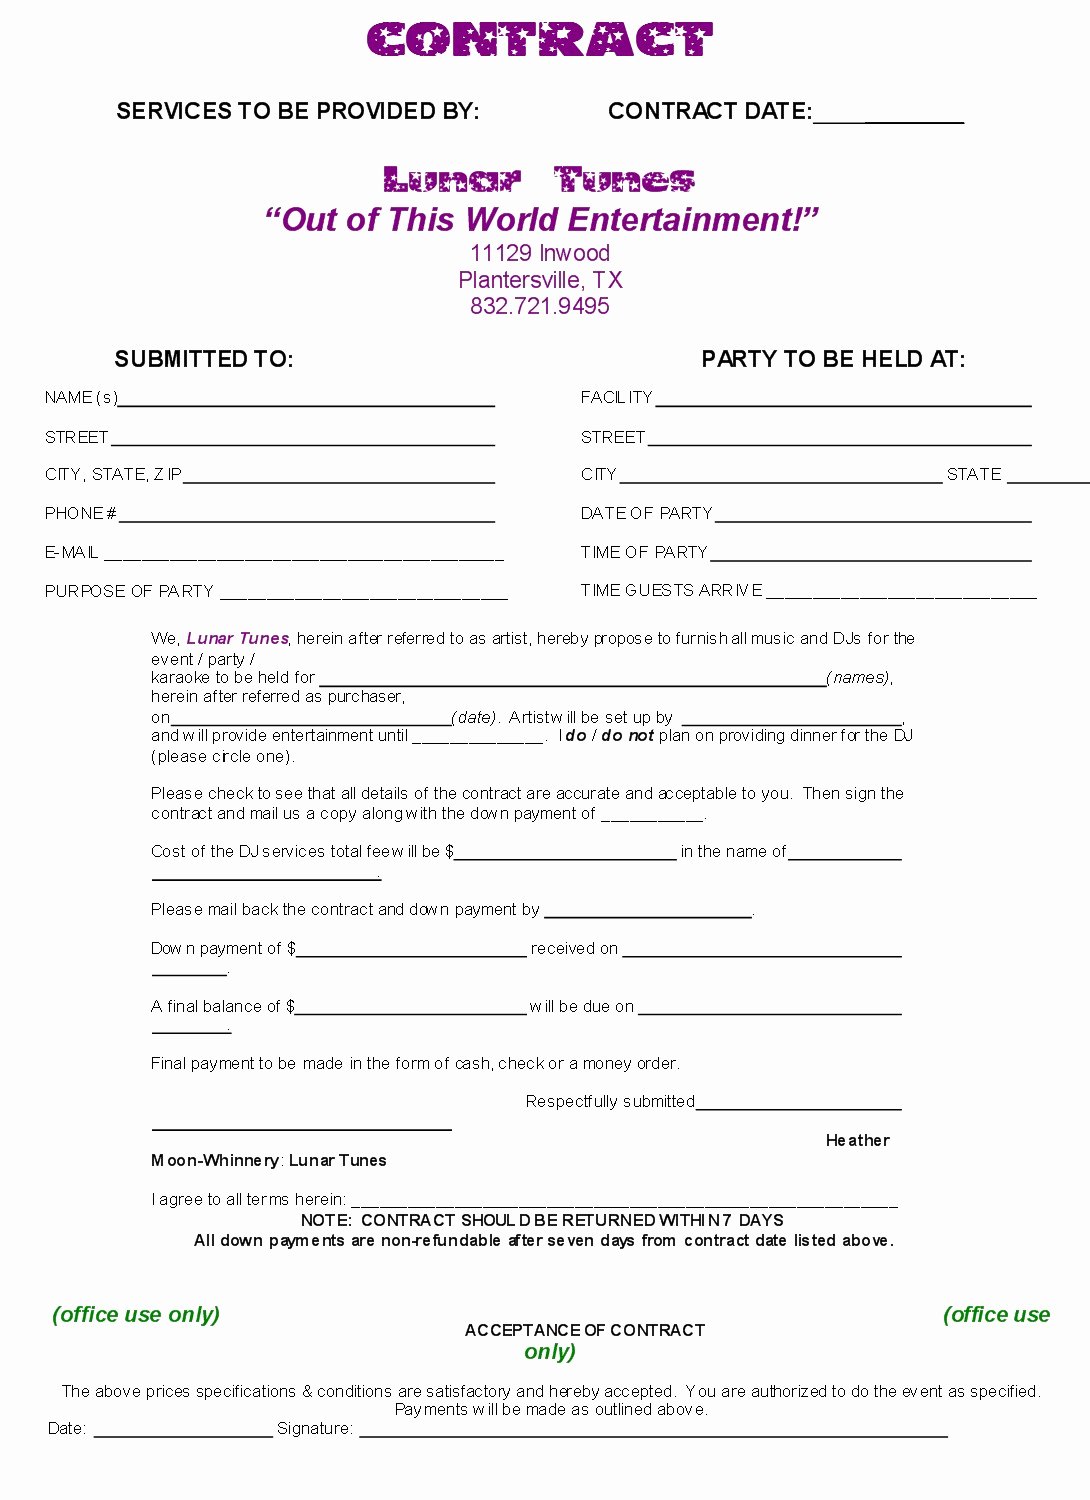 Sample Dj Contract Agreement Free Printable Documents